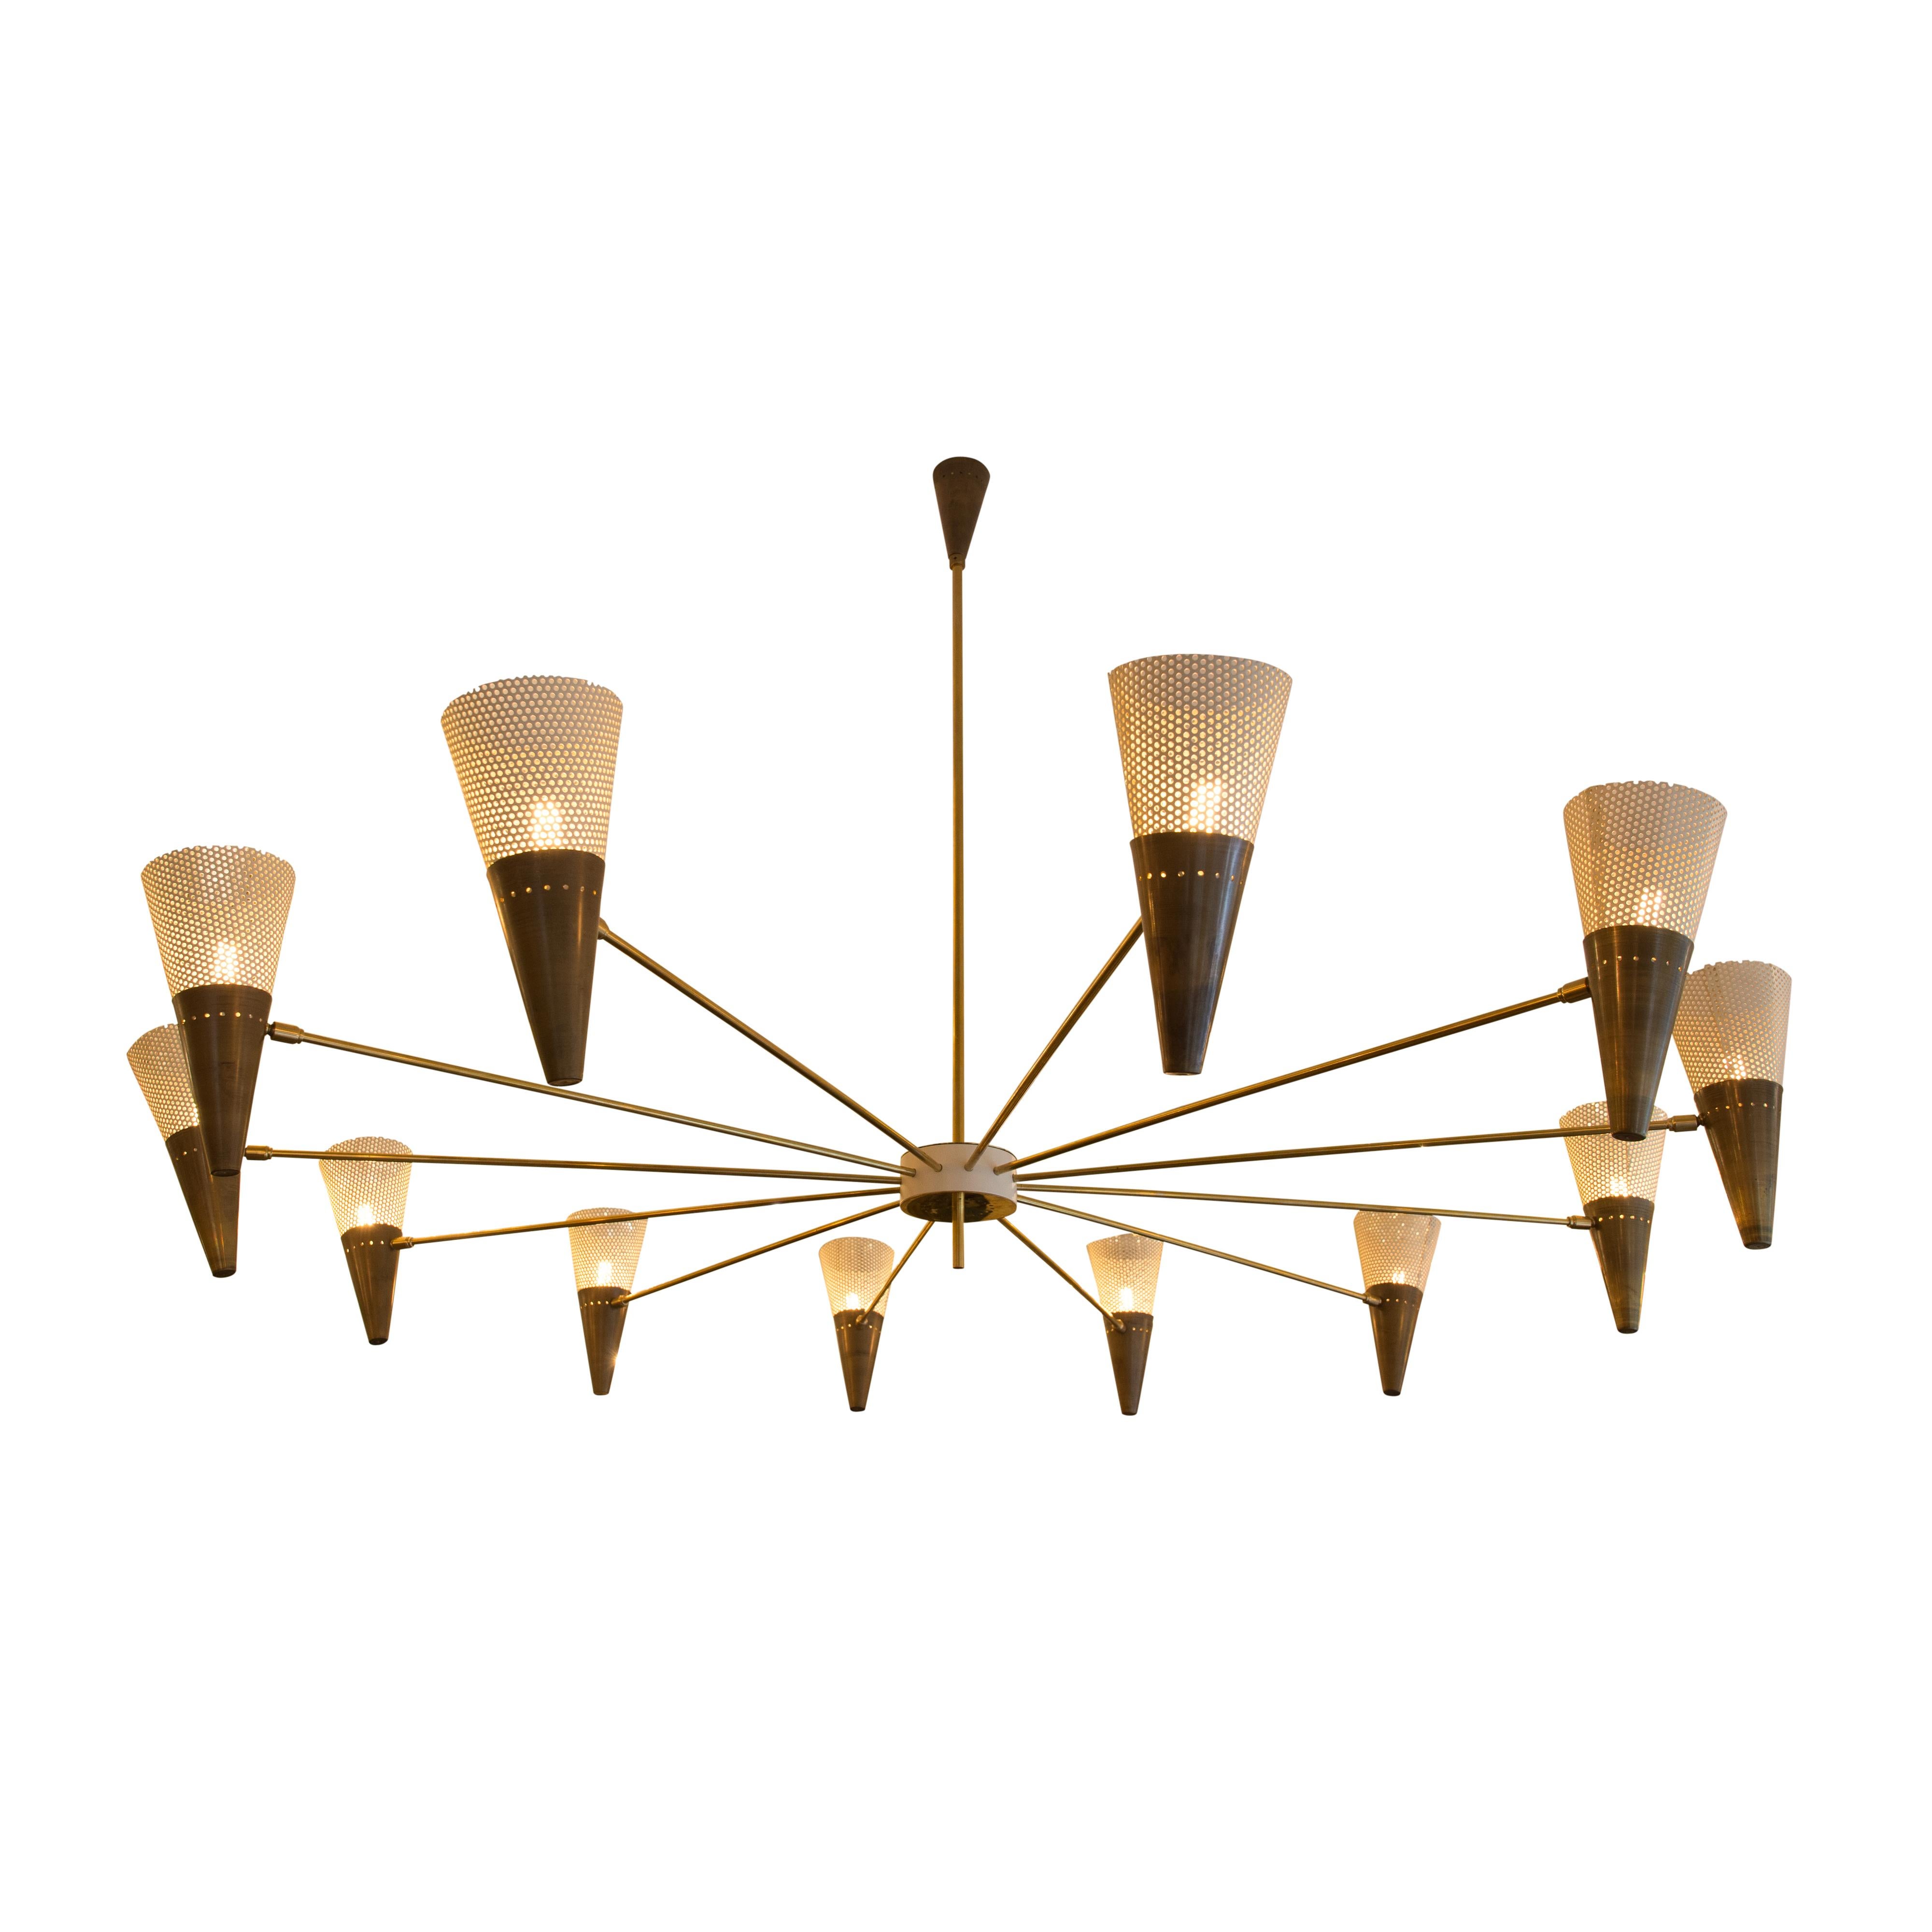 Italian Modern Bespoke Ceiling Light Brass and Ivory Color Shades by Diego Mardegan